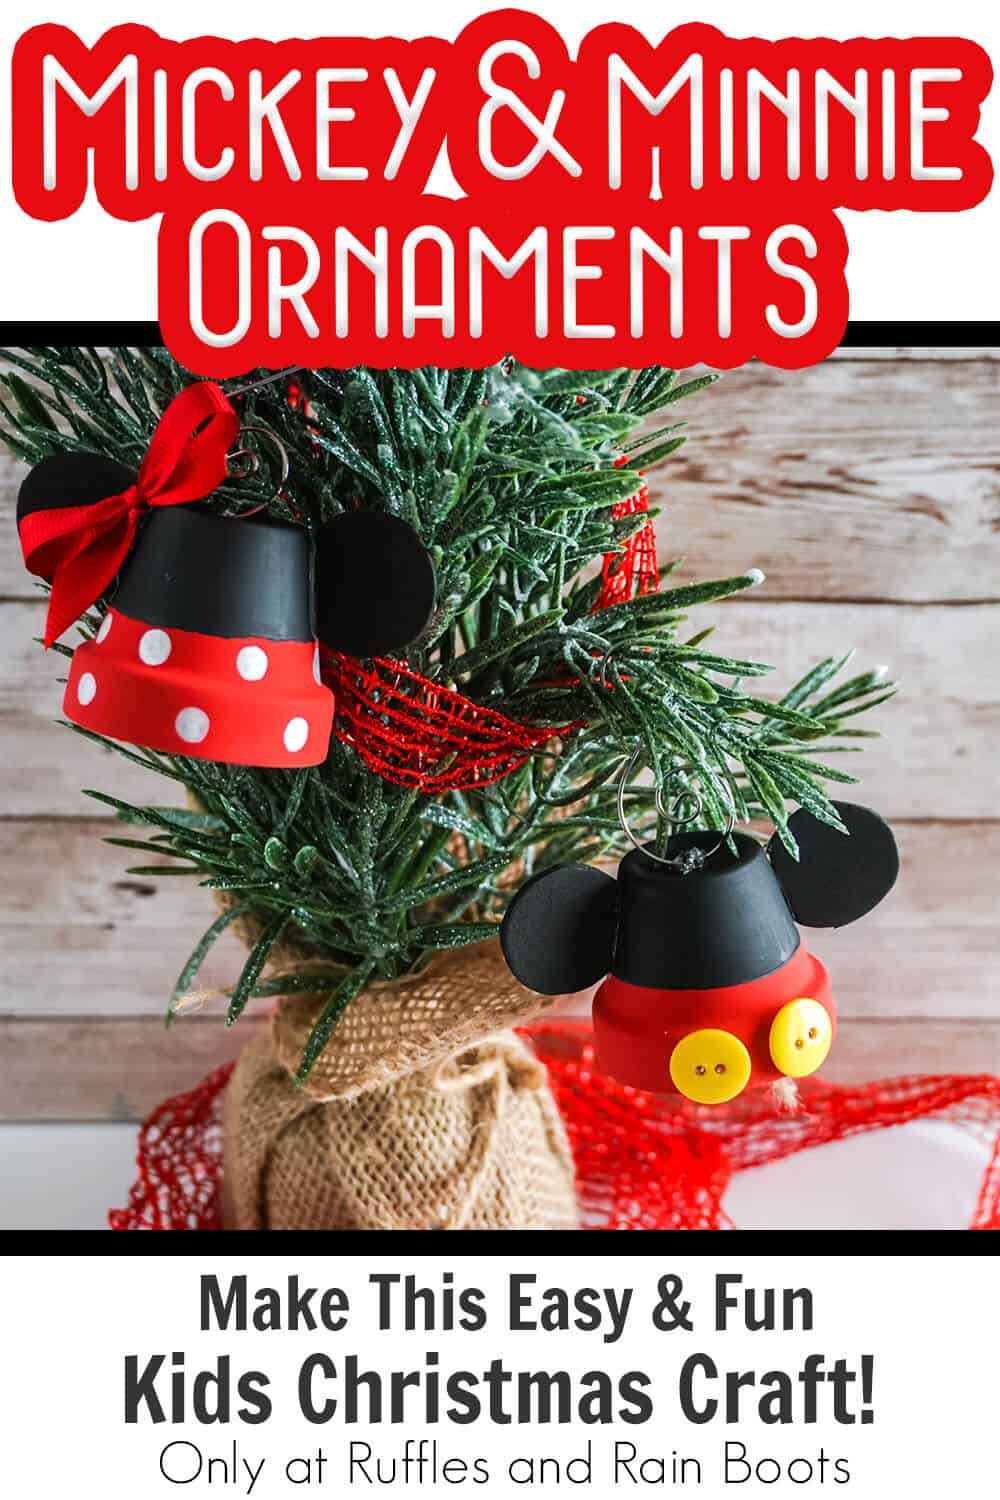 handmade christmas ornament set mickey and minnie with text which reads mickey & minnie ornaments make this easy & fun kids christmas craft!